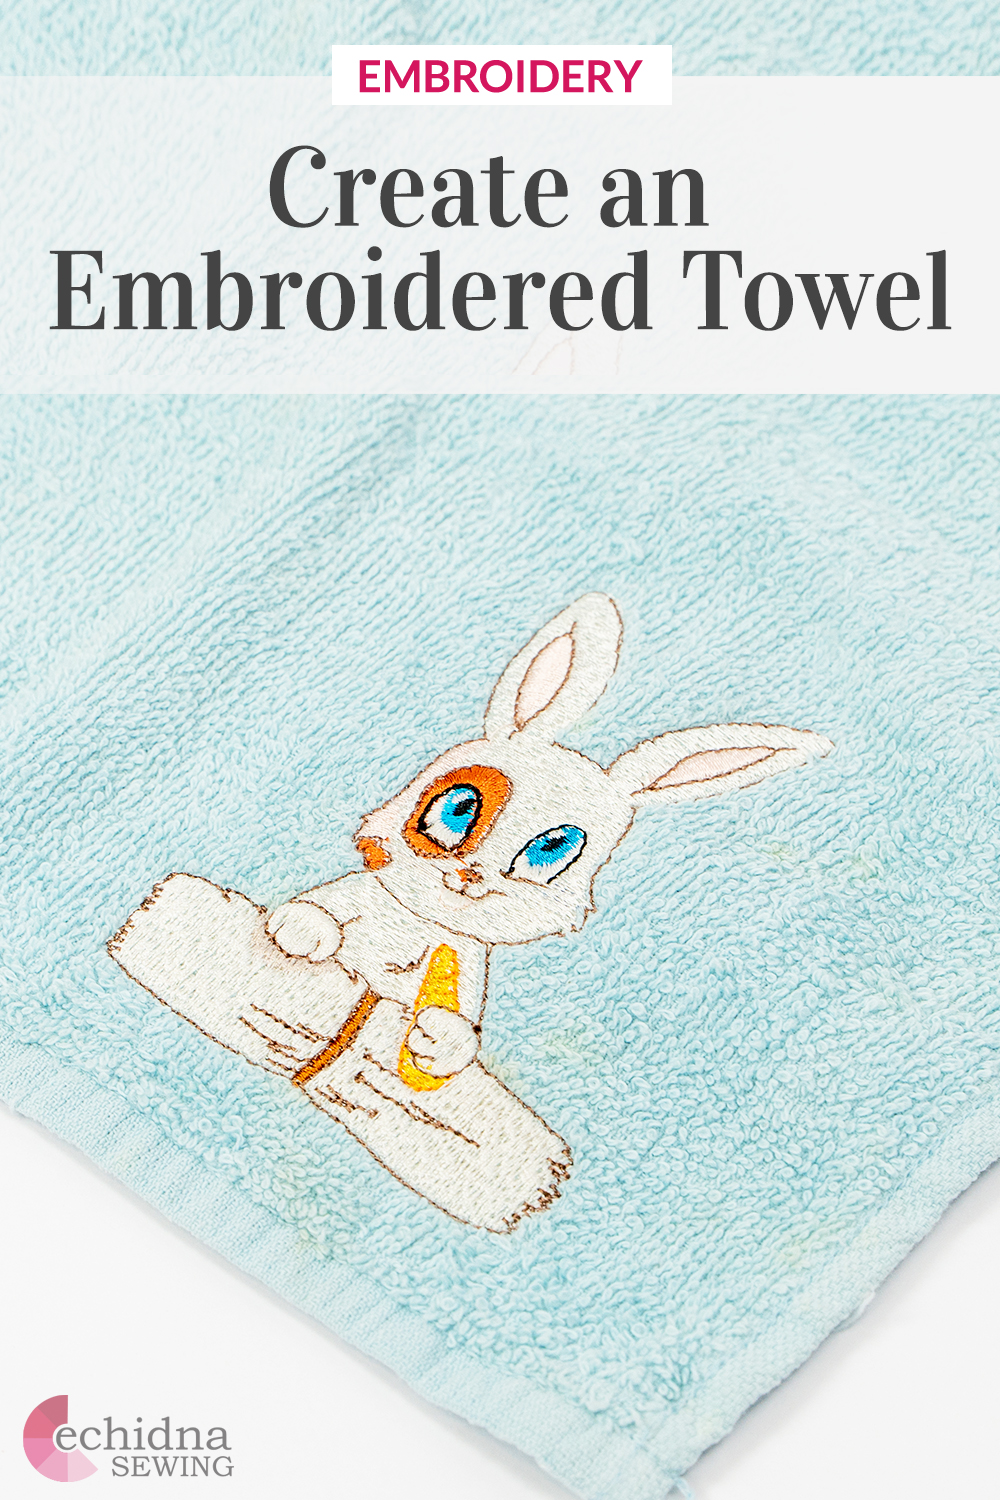 Embroider on a towel Project Pinterest